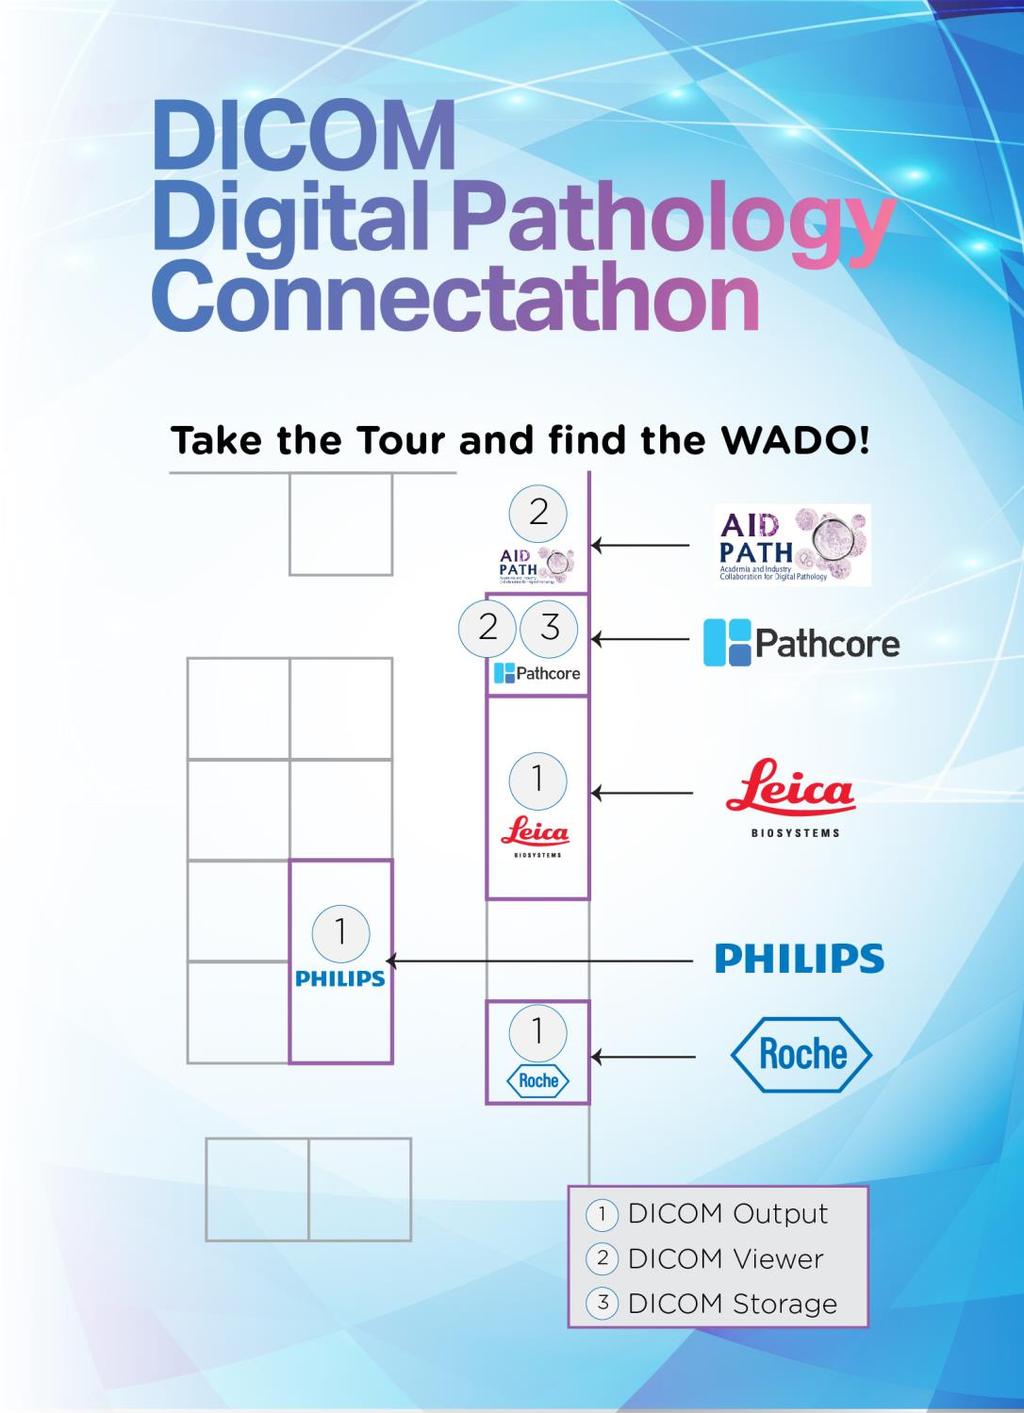 DICOM in Pathology DICOM Connectathons First one in post-fda clearance era at Path Visions 2017 Next one at Pathology